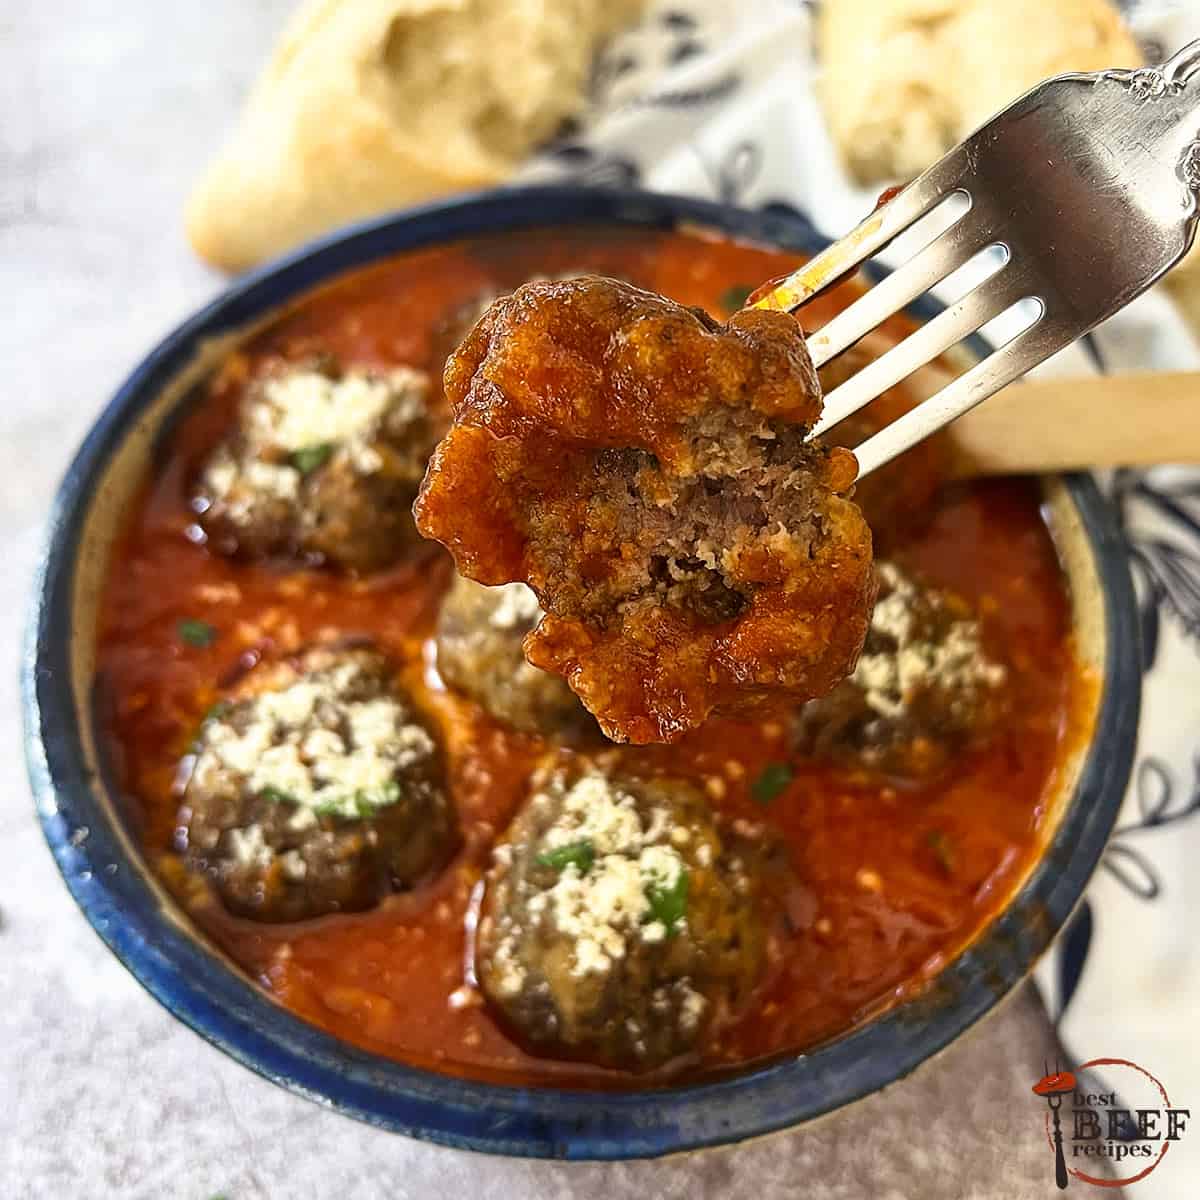 italian meatballs in red sauce in a blue bowl with a metal fork holding half a meatball and bread on the side.